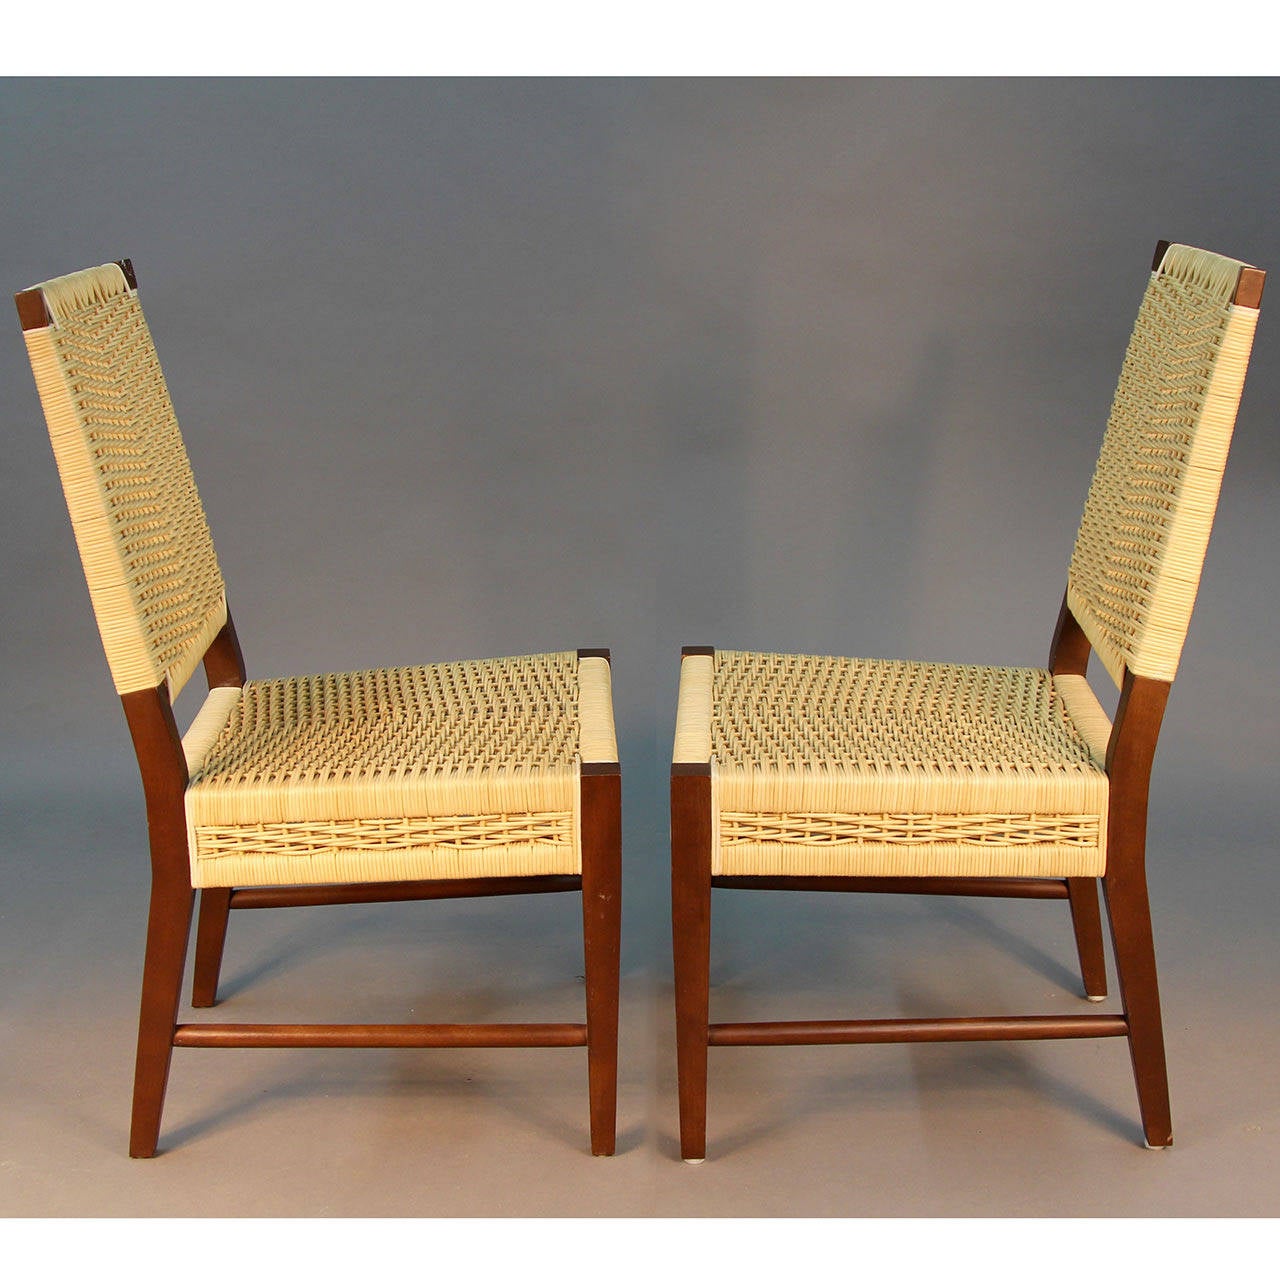 American Set of Four Donghia Dining Chairs in Merbau Wood with Raffia Weaving